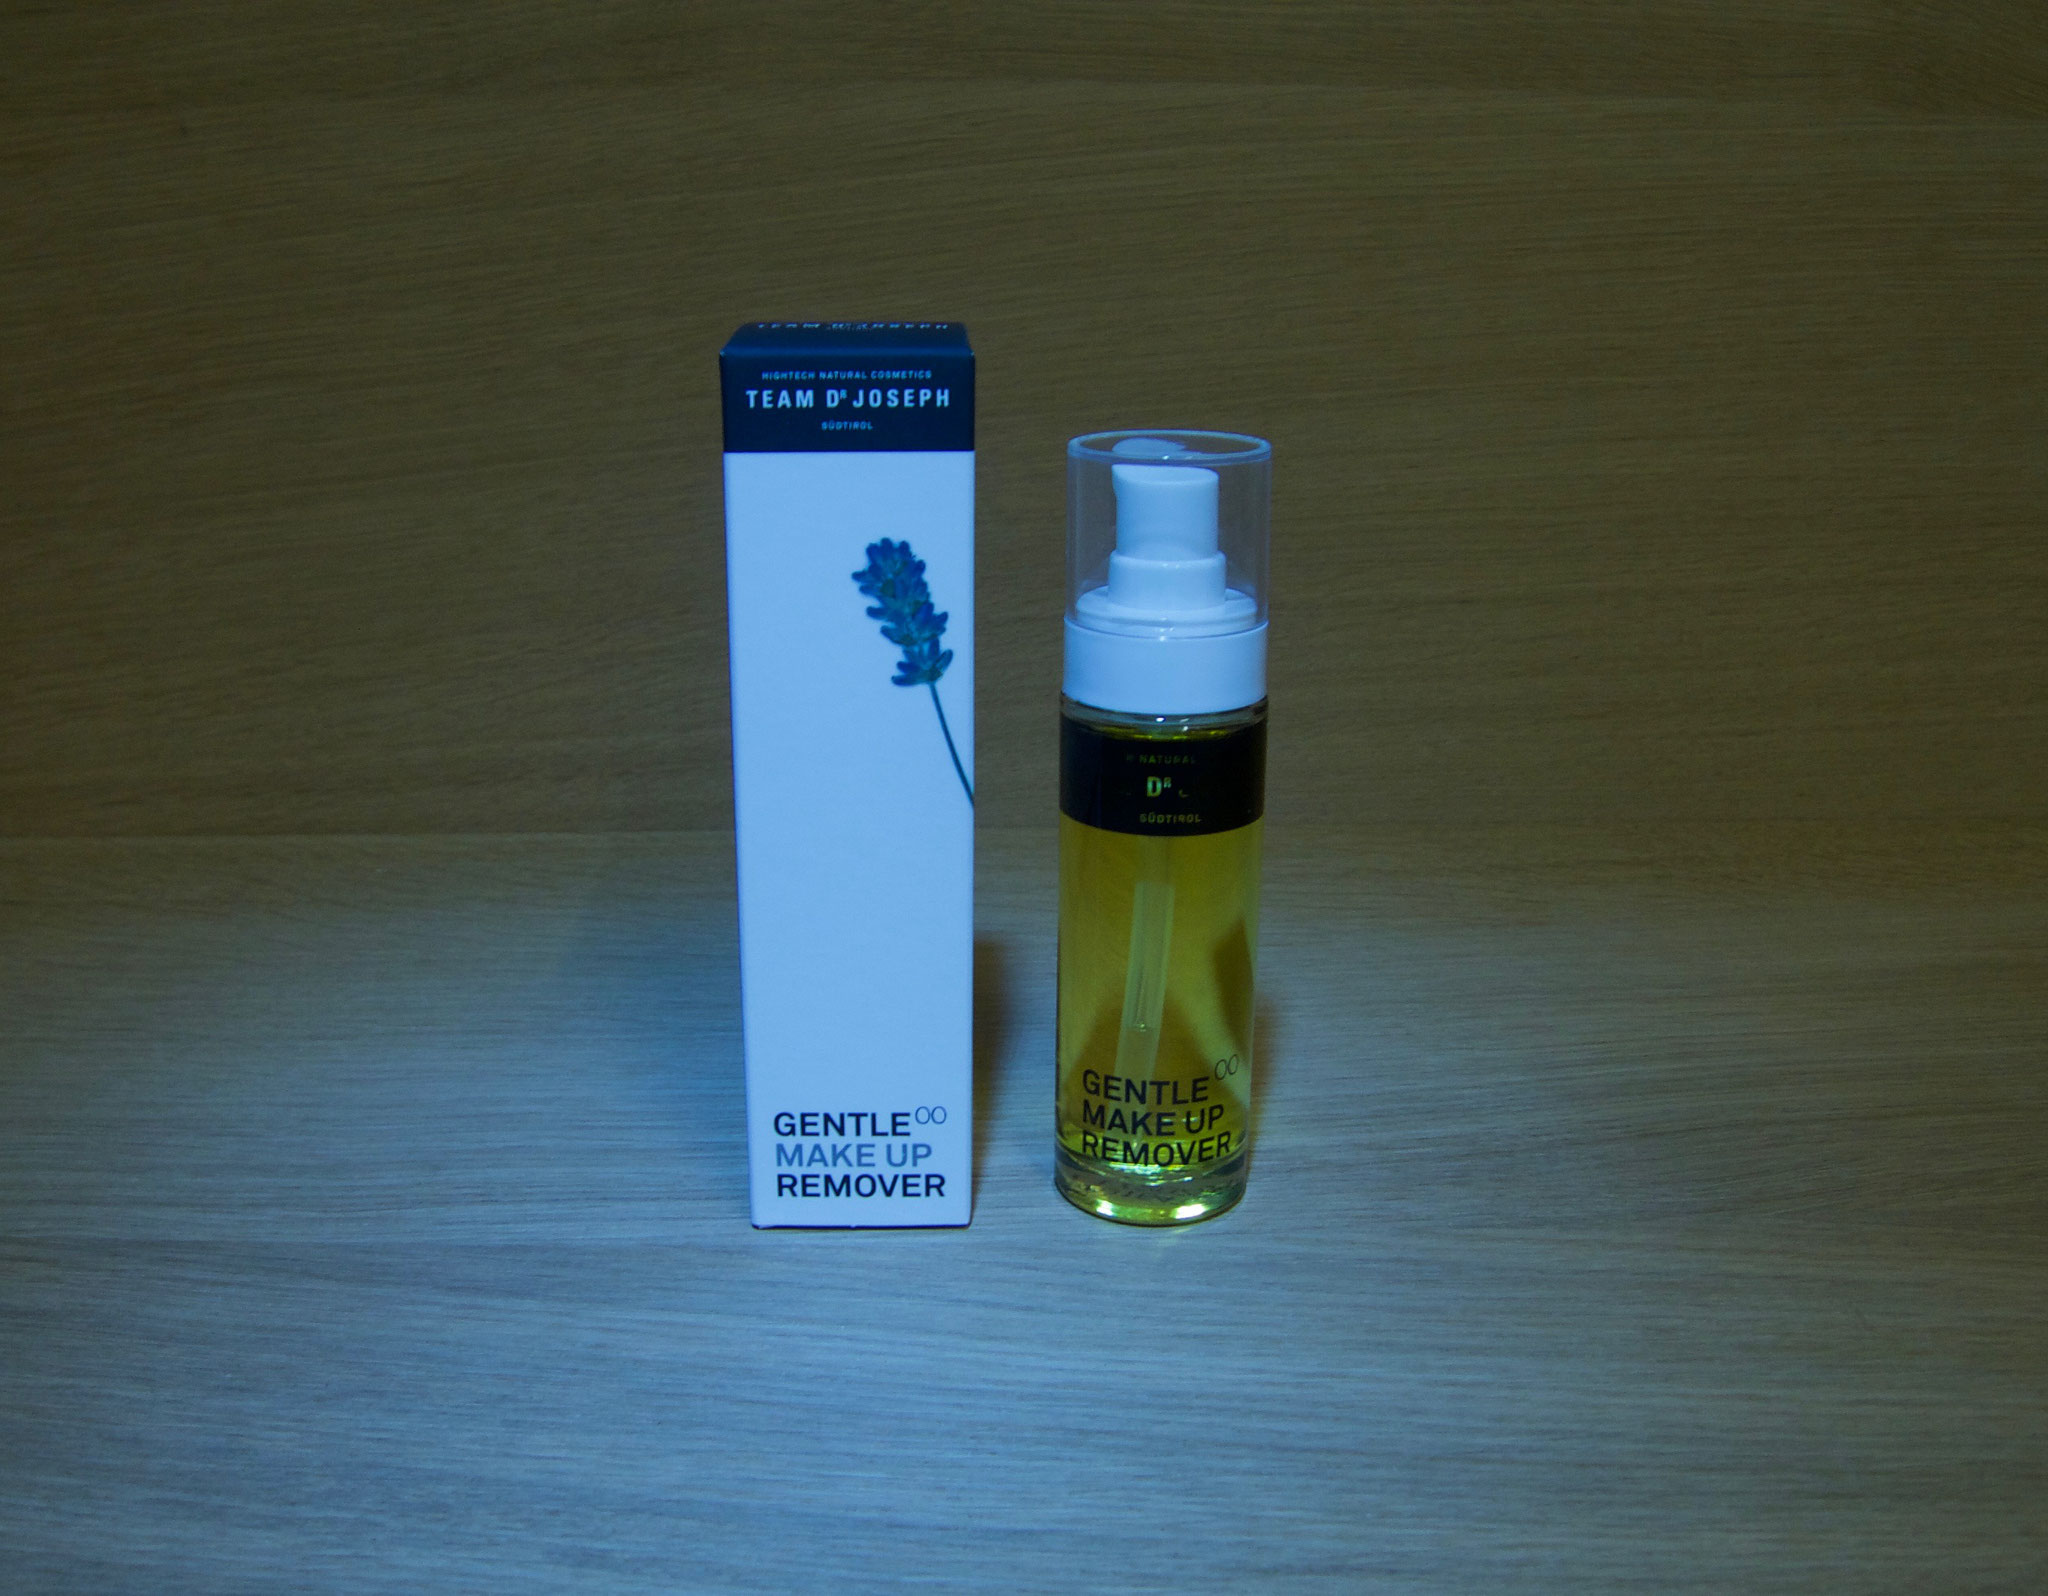 2. GENTLE 00 MAKE UP REMOVER  50 ml